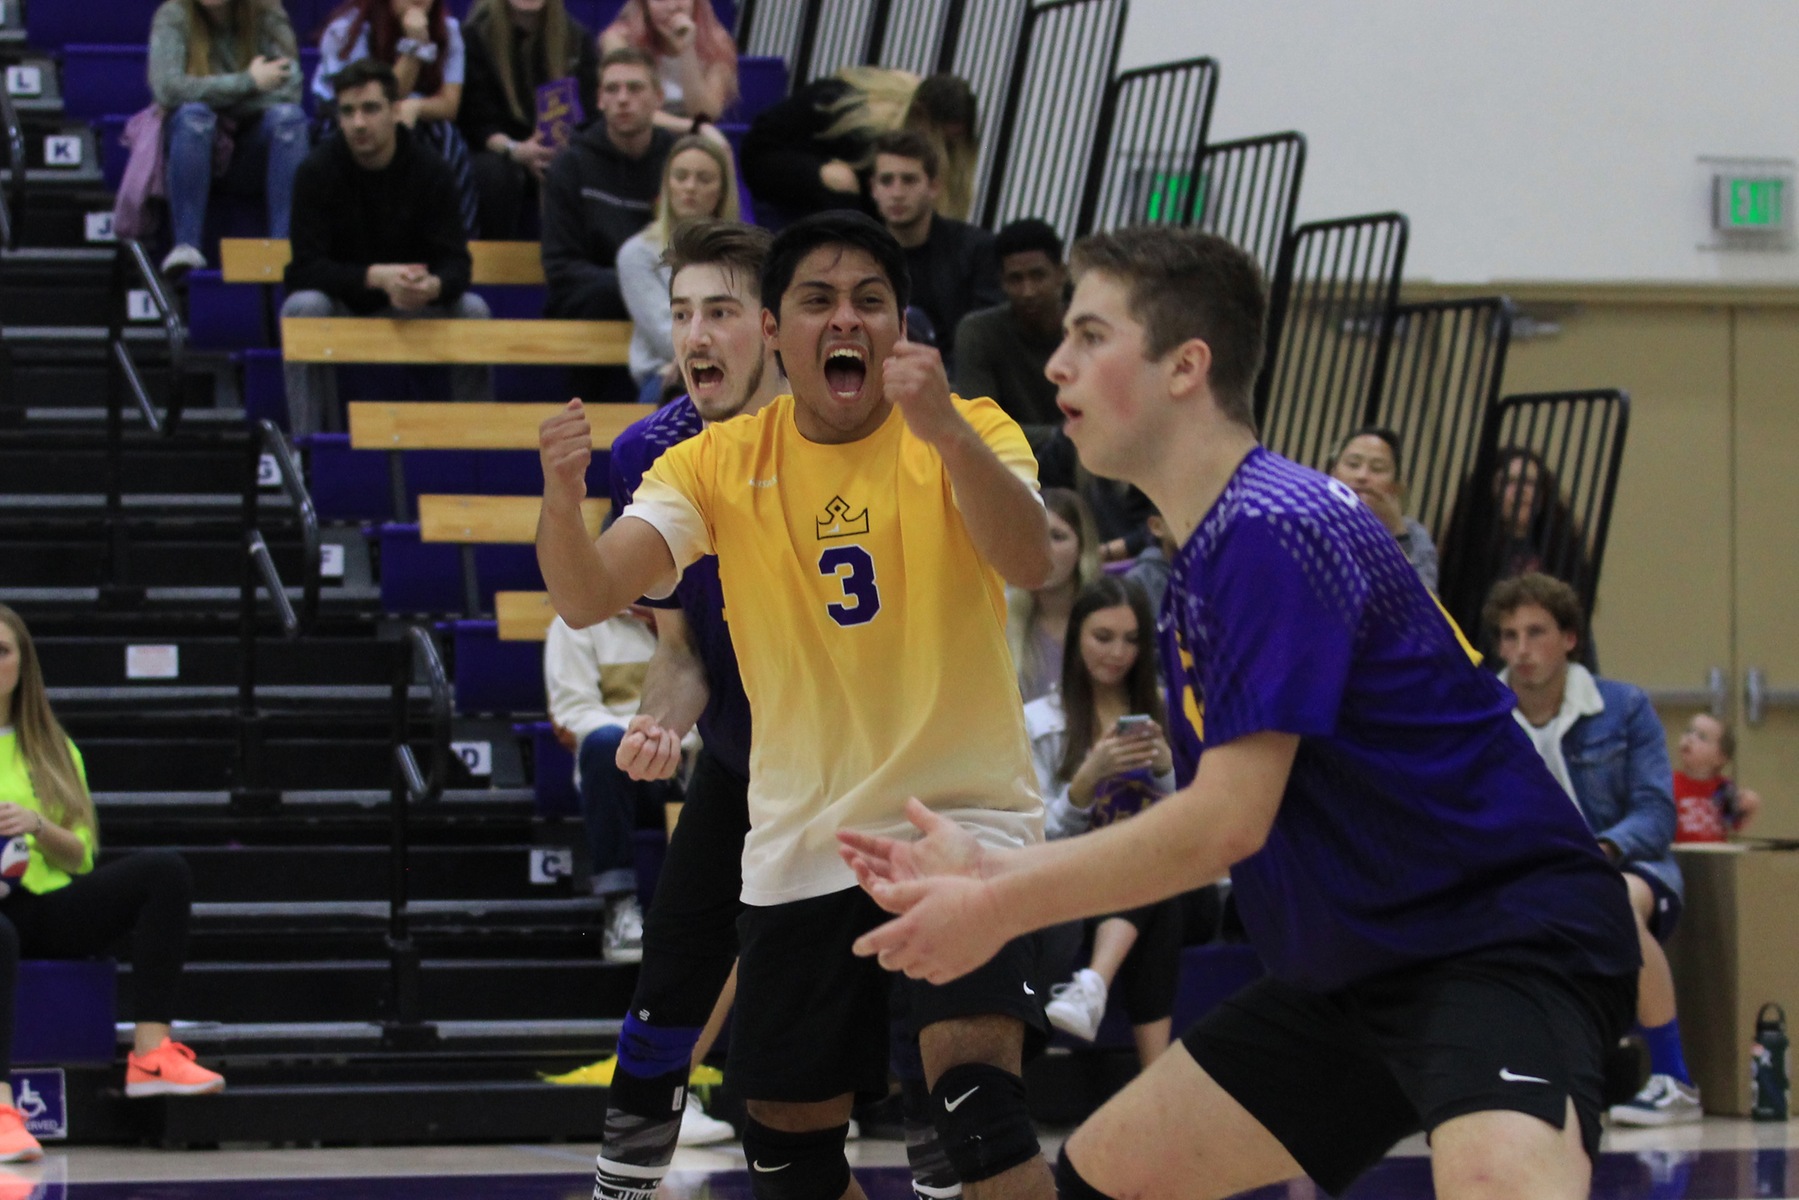 Kingsmen Sweep Mennonite, Fall to Southern Virginia on Final Day of Road Trip